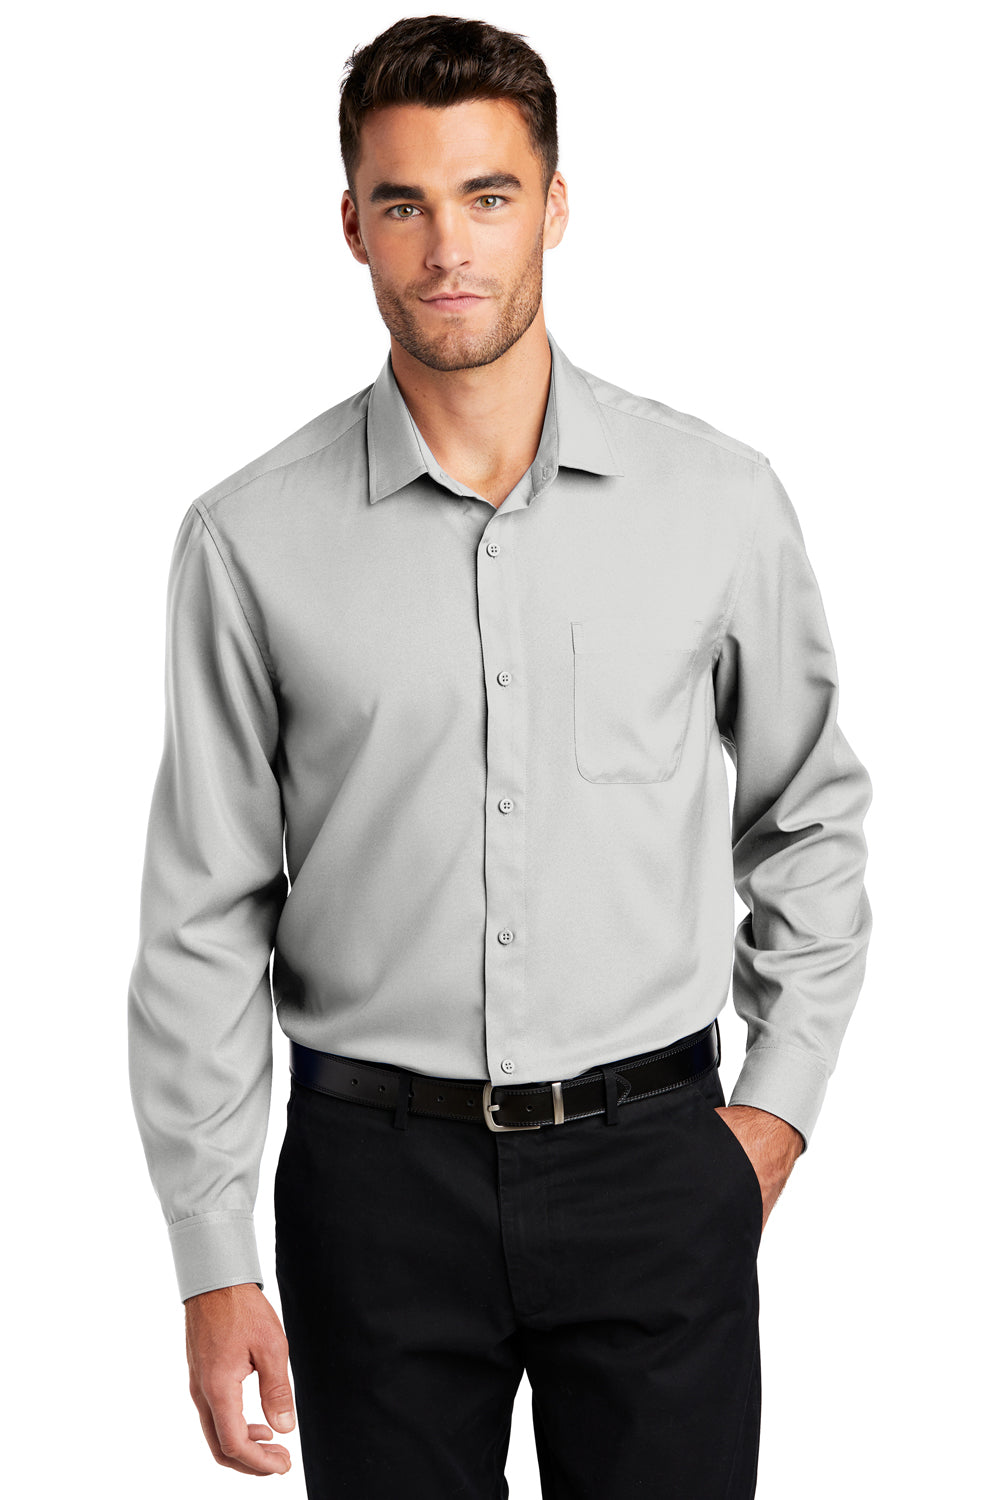 Port Authority Mens Performance Long Sleeve Button Down Shirt w/ Pocket Silver Grey Front